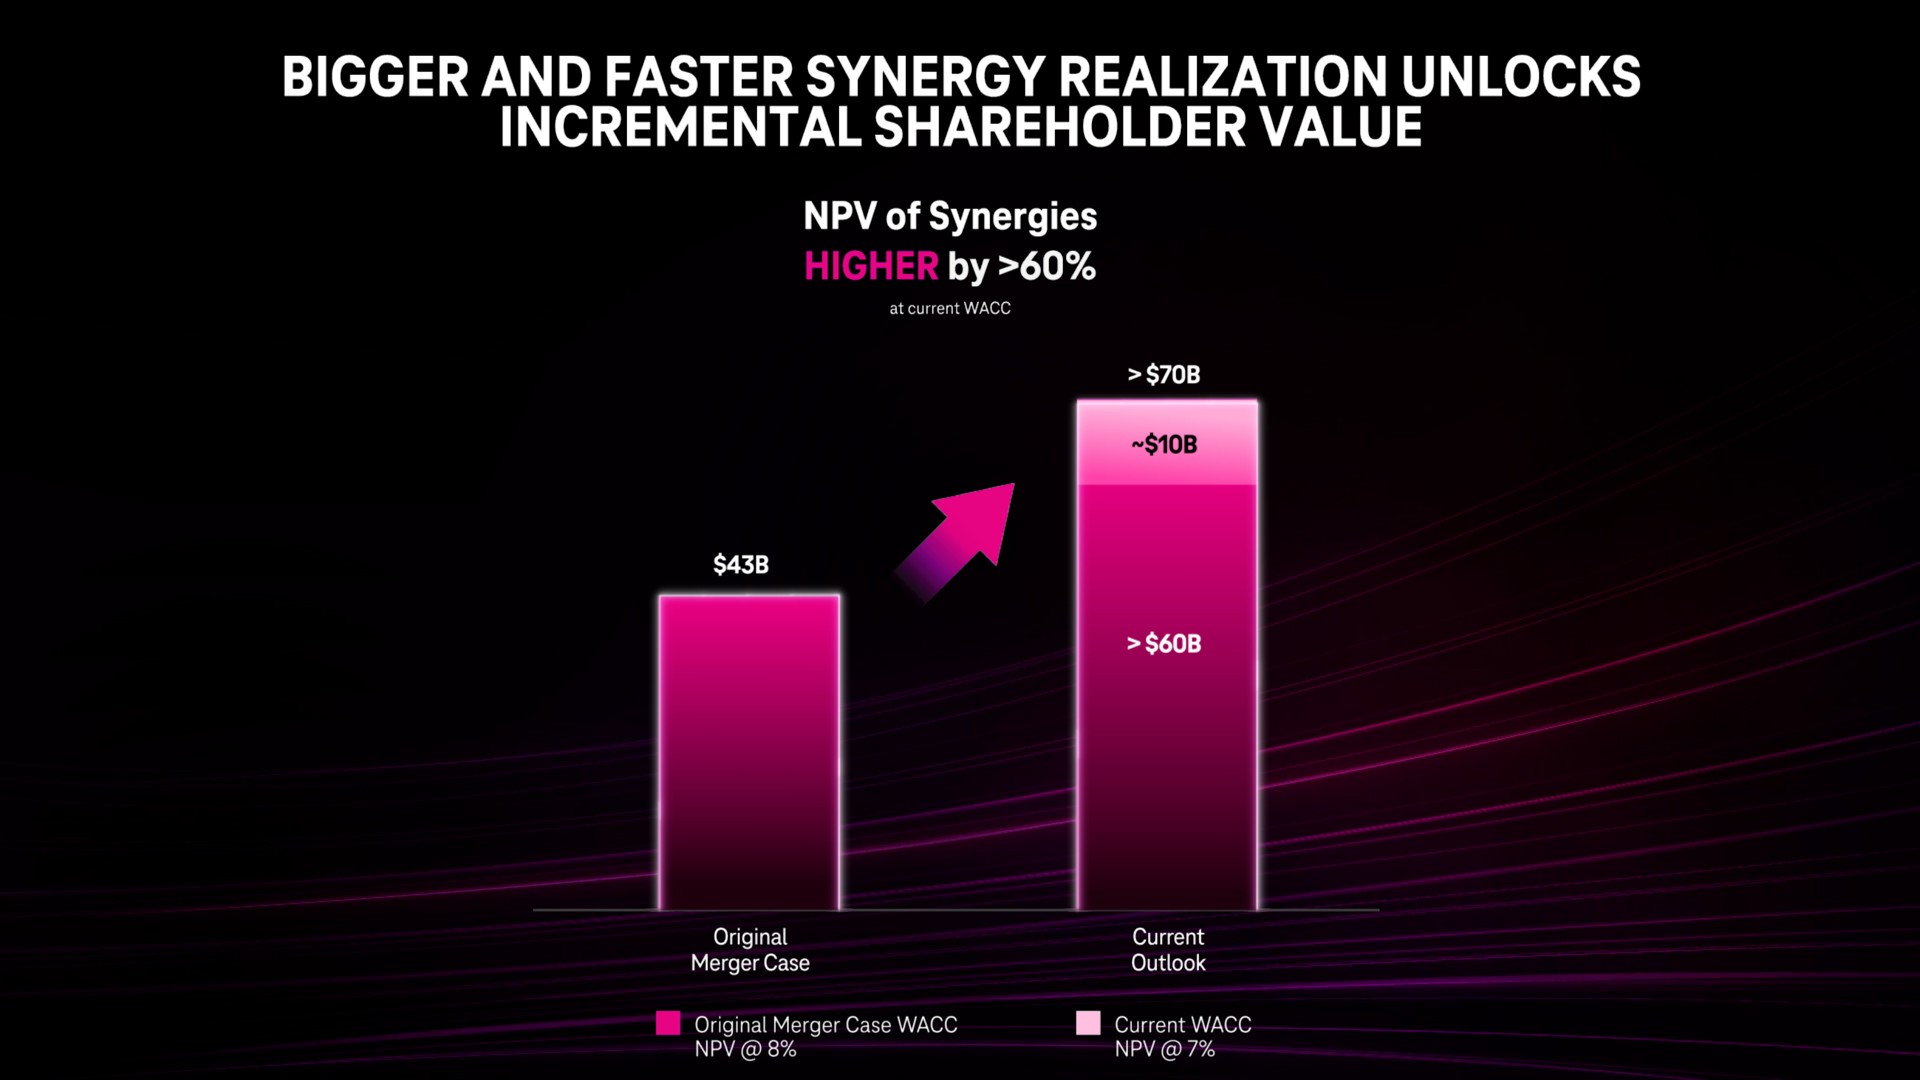 bigger and faster synergy realization unlocks incremental shareholder value of synergies by | Deutsche Telekom